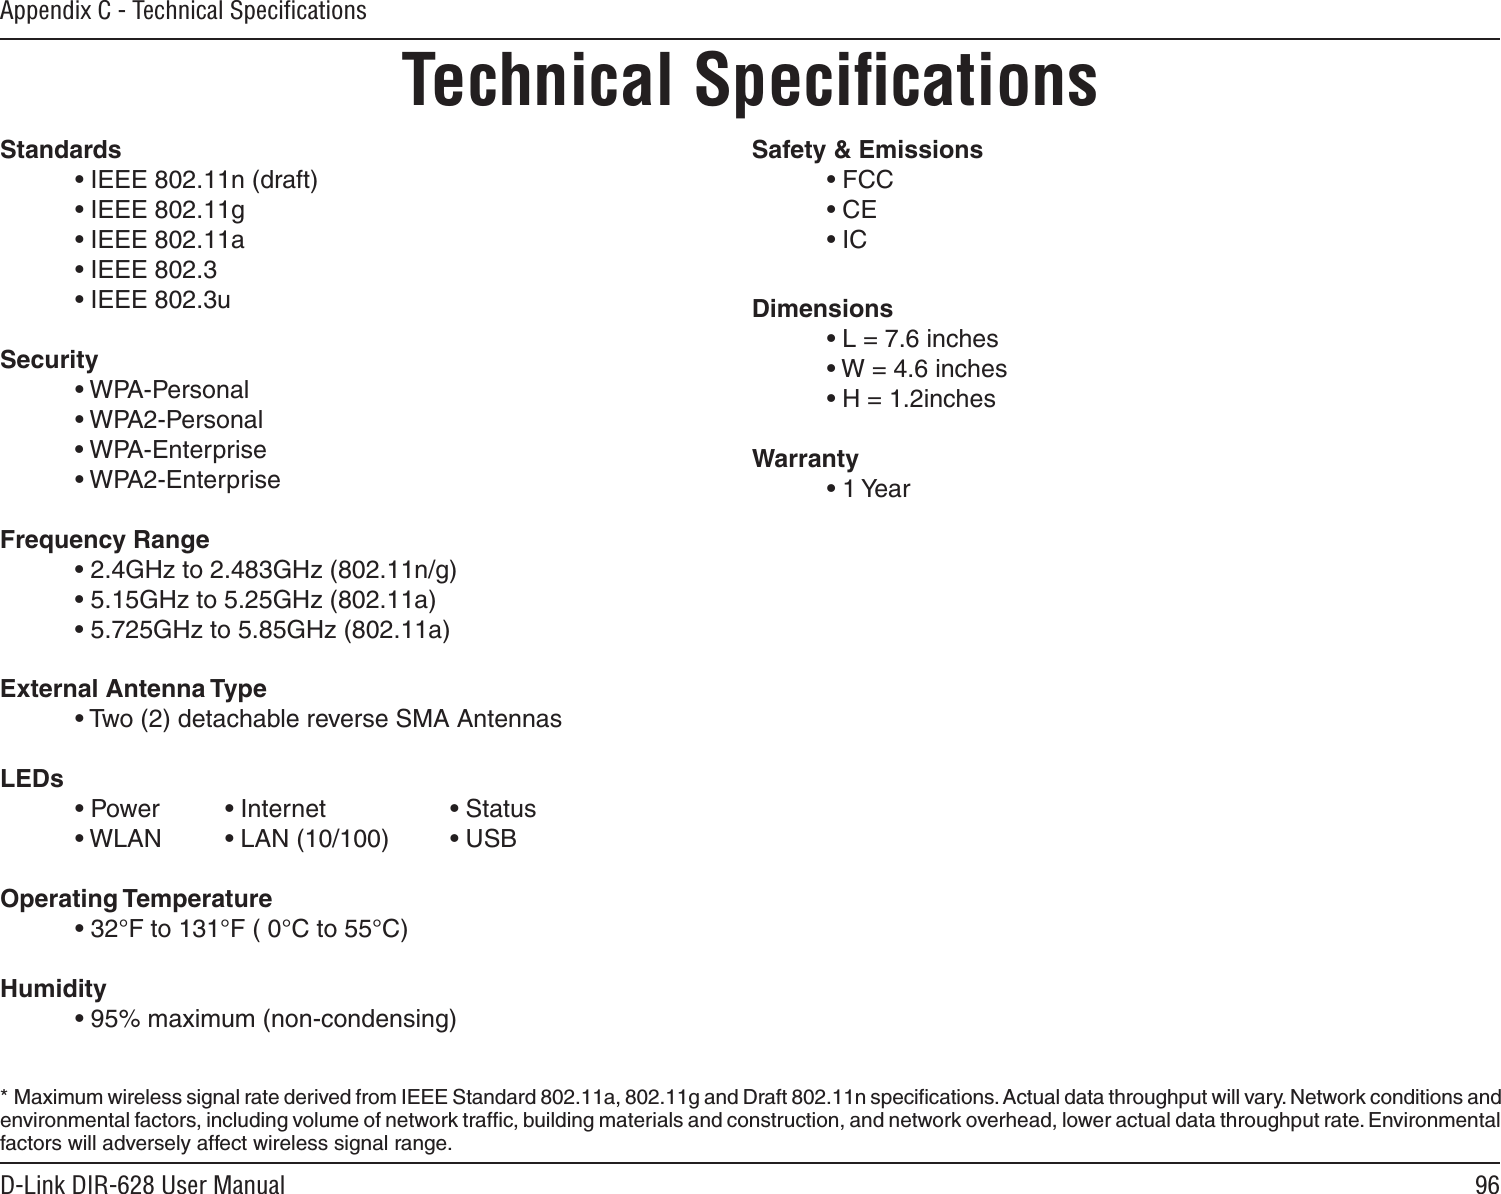 96D-Link DIR-628 User ManualAppendix C - Technical SpeciﬁcationsTechnical SpeciﬁcationsStandards • IEEE 802.11n (draft) • IEEE 802.11g • IEEE 802.11a • IEEE 802.3 • IEEE 802.3uSecurity • WPA-Personal • WPA2-Personal • WPA-Enterprise • WPA2-EnterpriseFrequency Range • 2.4GHz to 2.483GHz (802.11n/g) • 5.15GHz to 5.25GHz (802.11a)• 5.725GHz to 5.85GHz (802.11a)External Antenna Type • Two (2) detachable reverse SMA AntennasLEDs • Power   • Internet    • Status • WLAN   • LAN (10/100) • USBOperating Temperature • 32°F to 131°F ( 0°C to 55°C)Humidity • 95% maximum (non-condensing)Safety &amp; Emissions   • FCC• CE• ICDimensions • L = 7.6 inches • W = 4.6 inches • H = 1.2inchesWarranty • 1 Year*  Maximum wireless signal rate derived from IEEE Standard 802.11a, 802.11g and Draft 802.11n speciﬁcations. Actual data throughput will vary. Network conditions and environmental factors, including volume of network trafﬁc, building materials and construction, and network overhead, lower actual data throughput rate. Environmental factors will adversely affect wireless signal range.